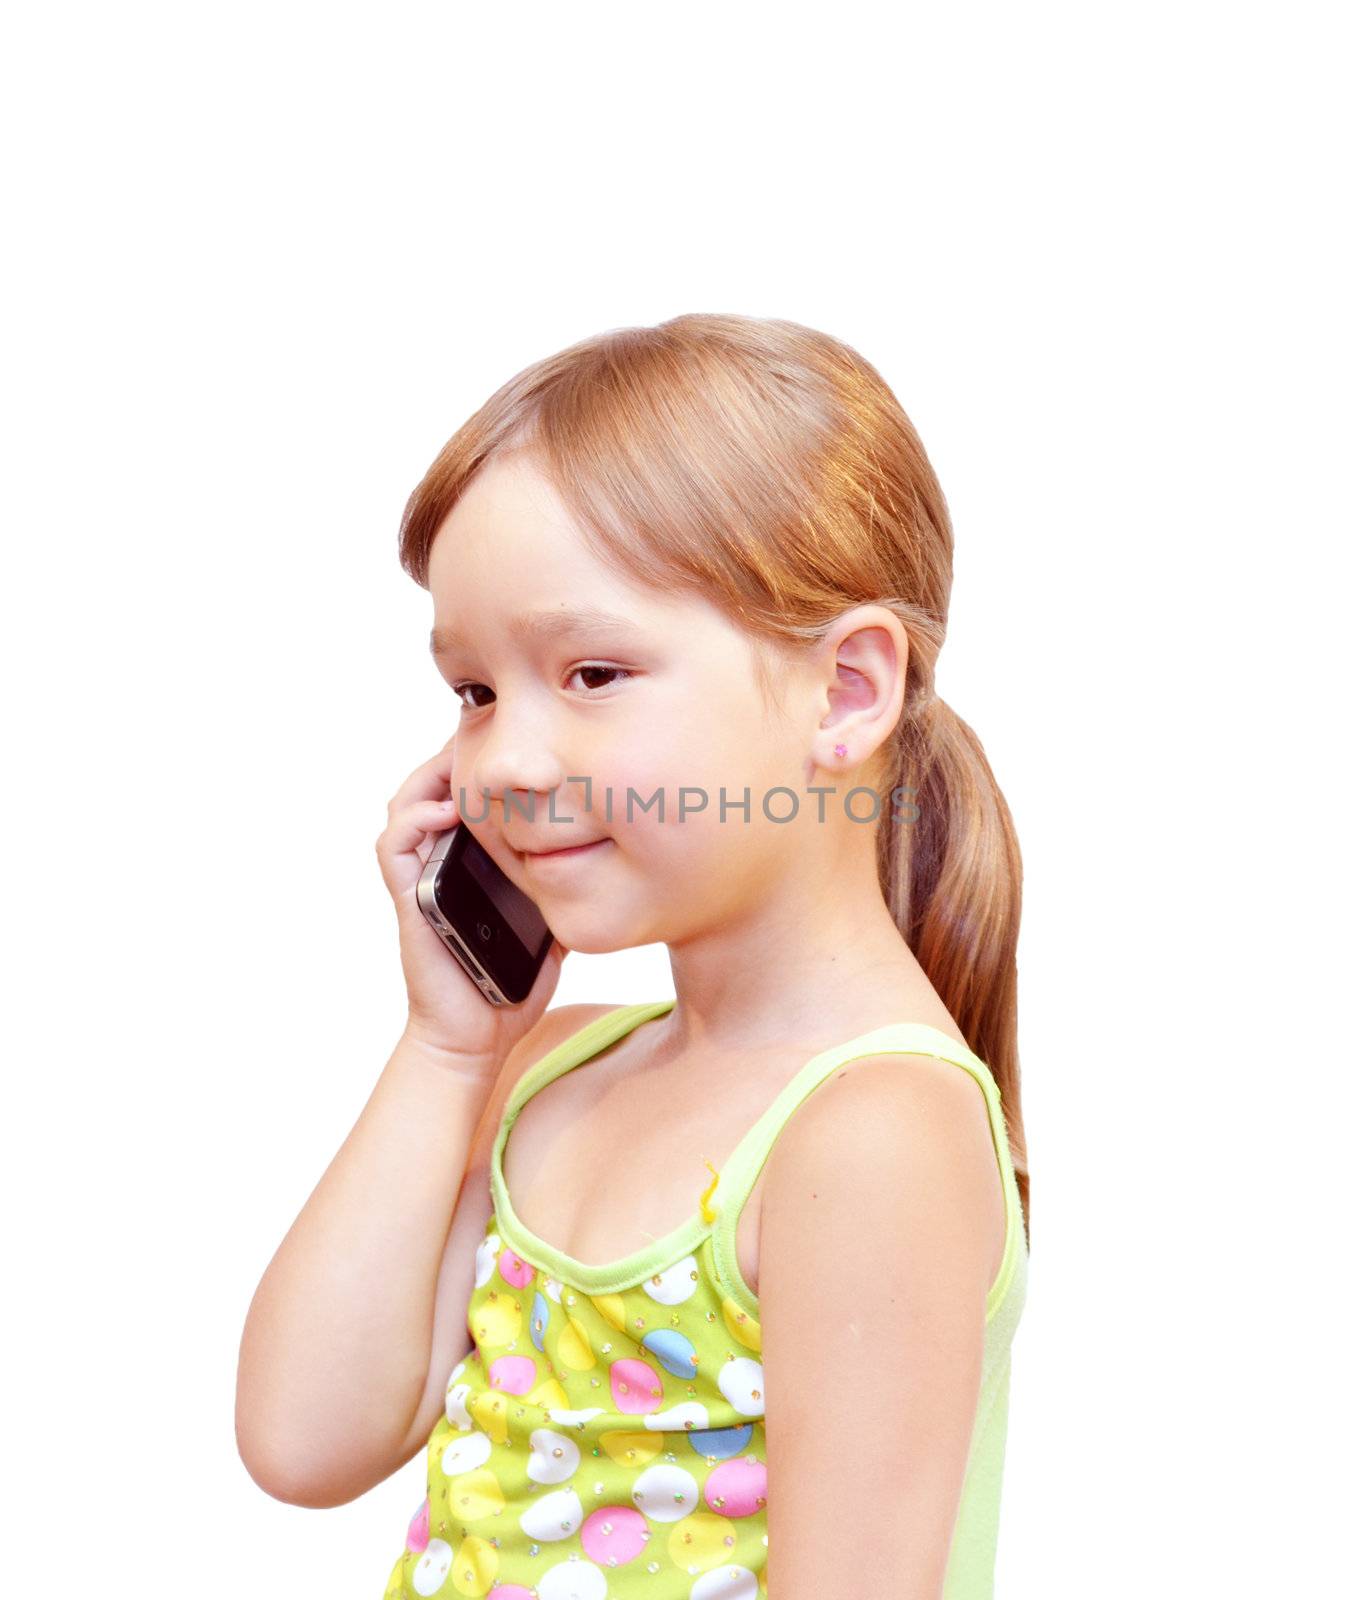 The Child and telephone, on white background.  